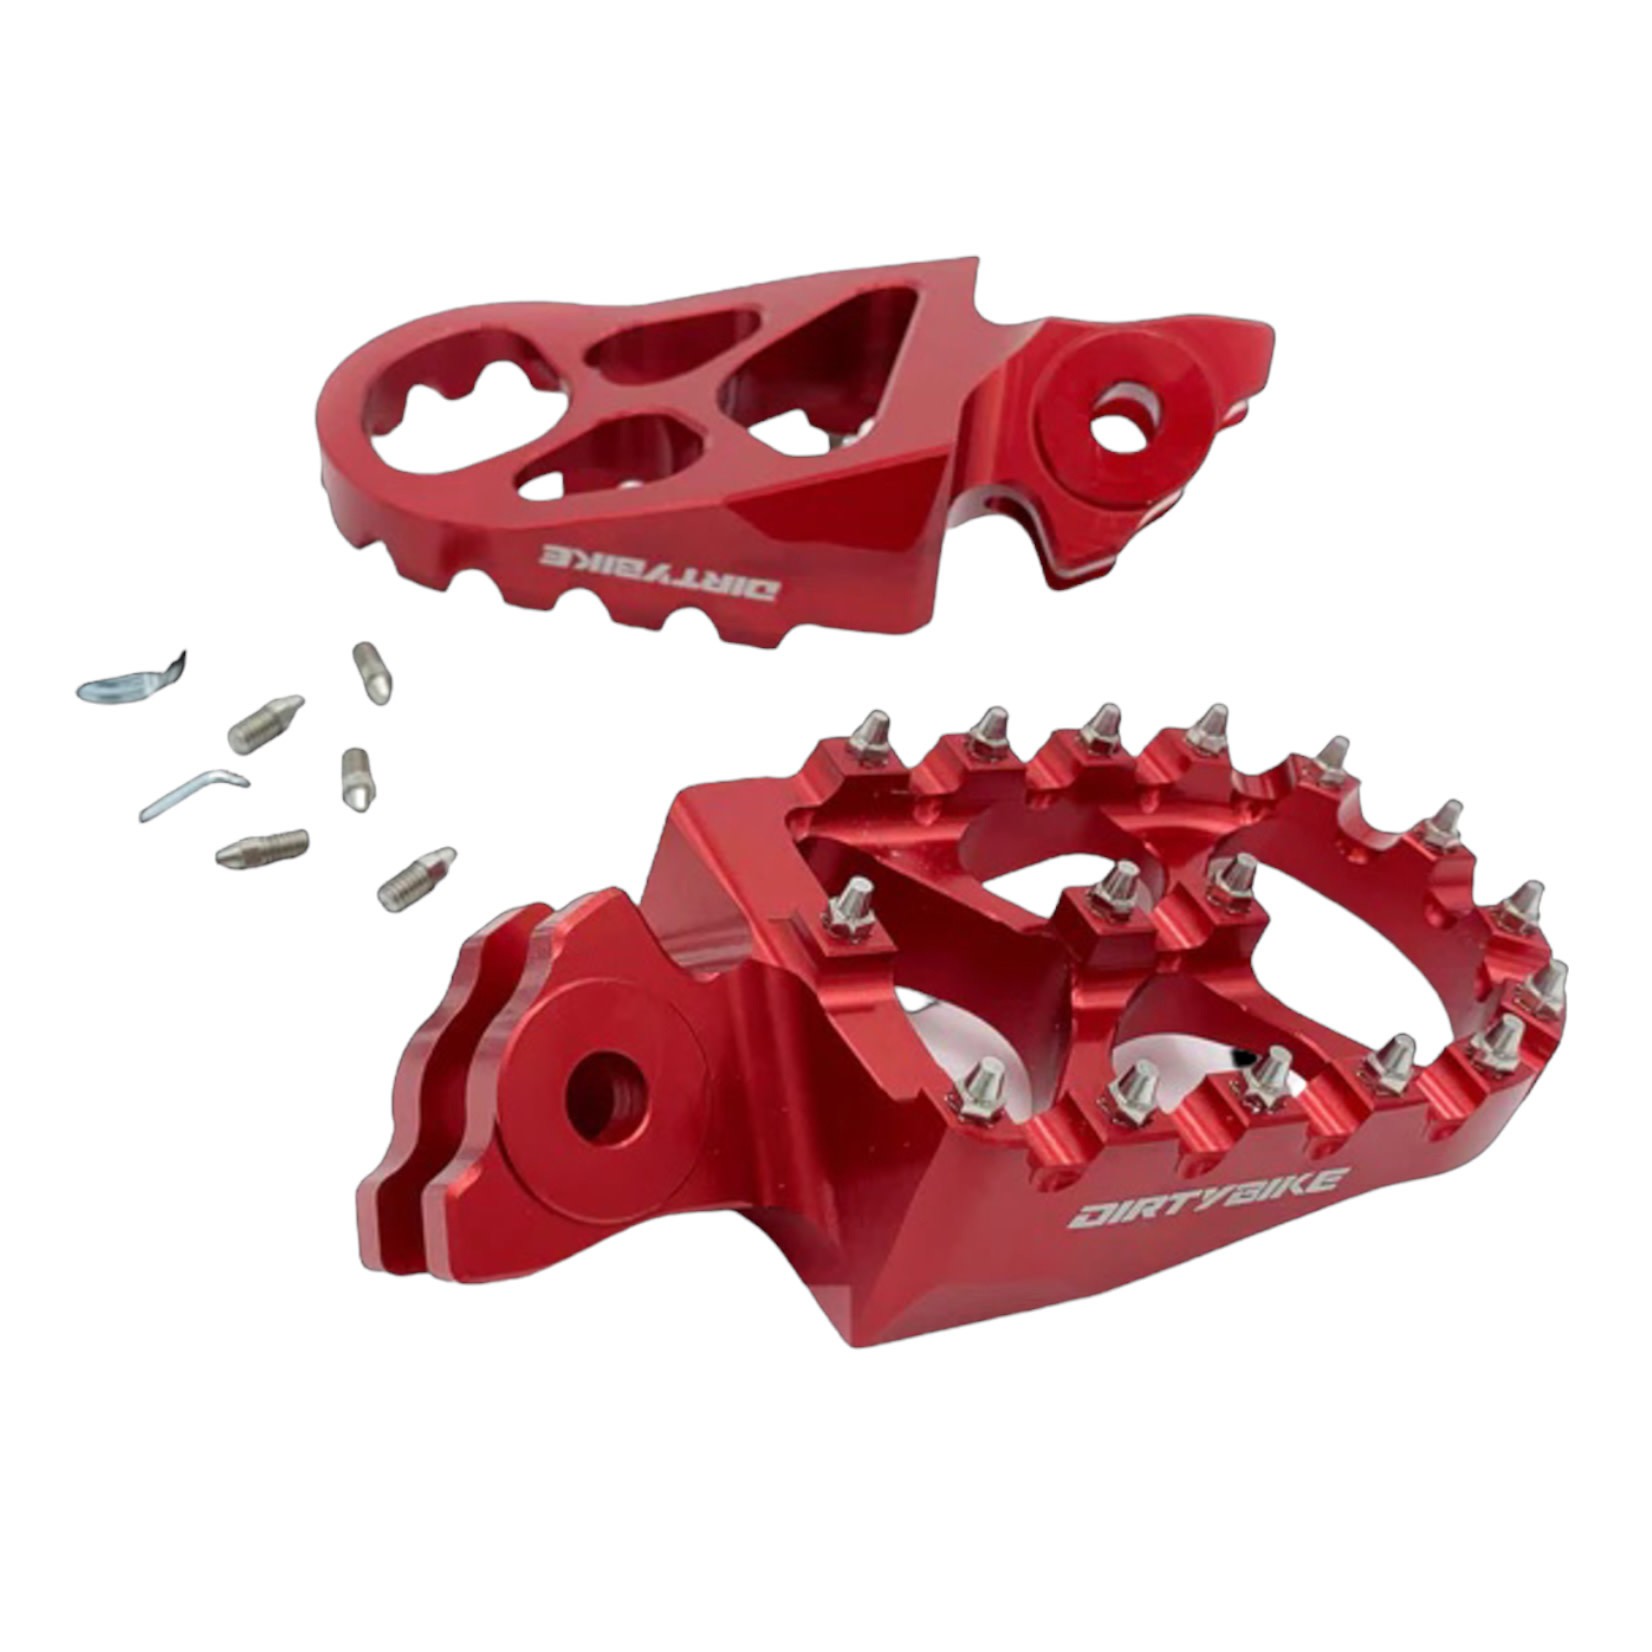 Surron offroad footpegs red